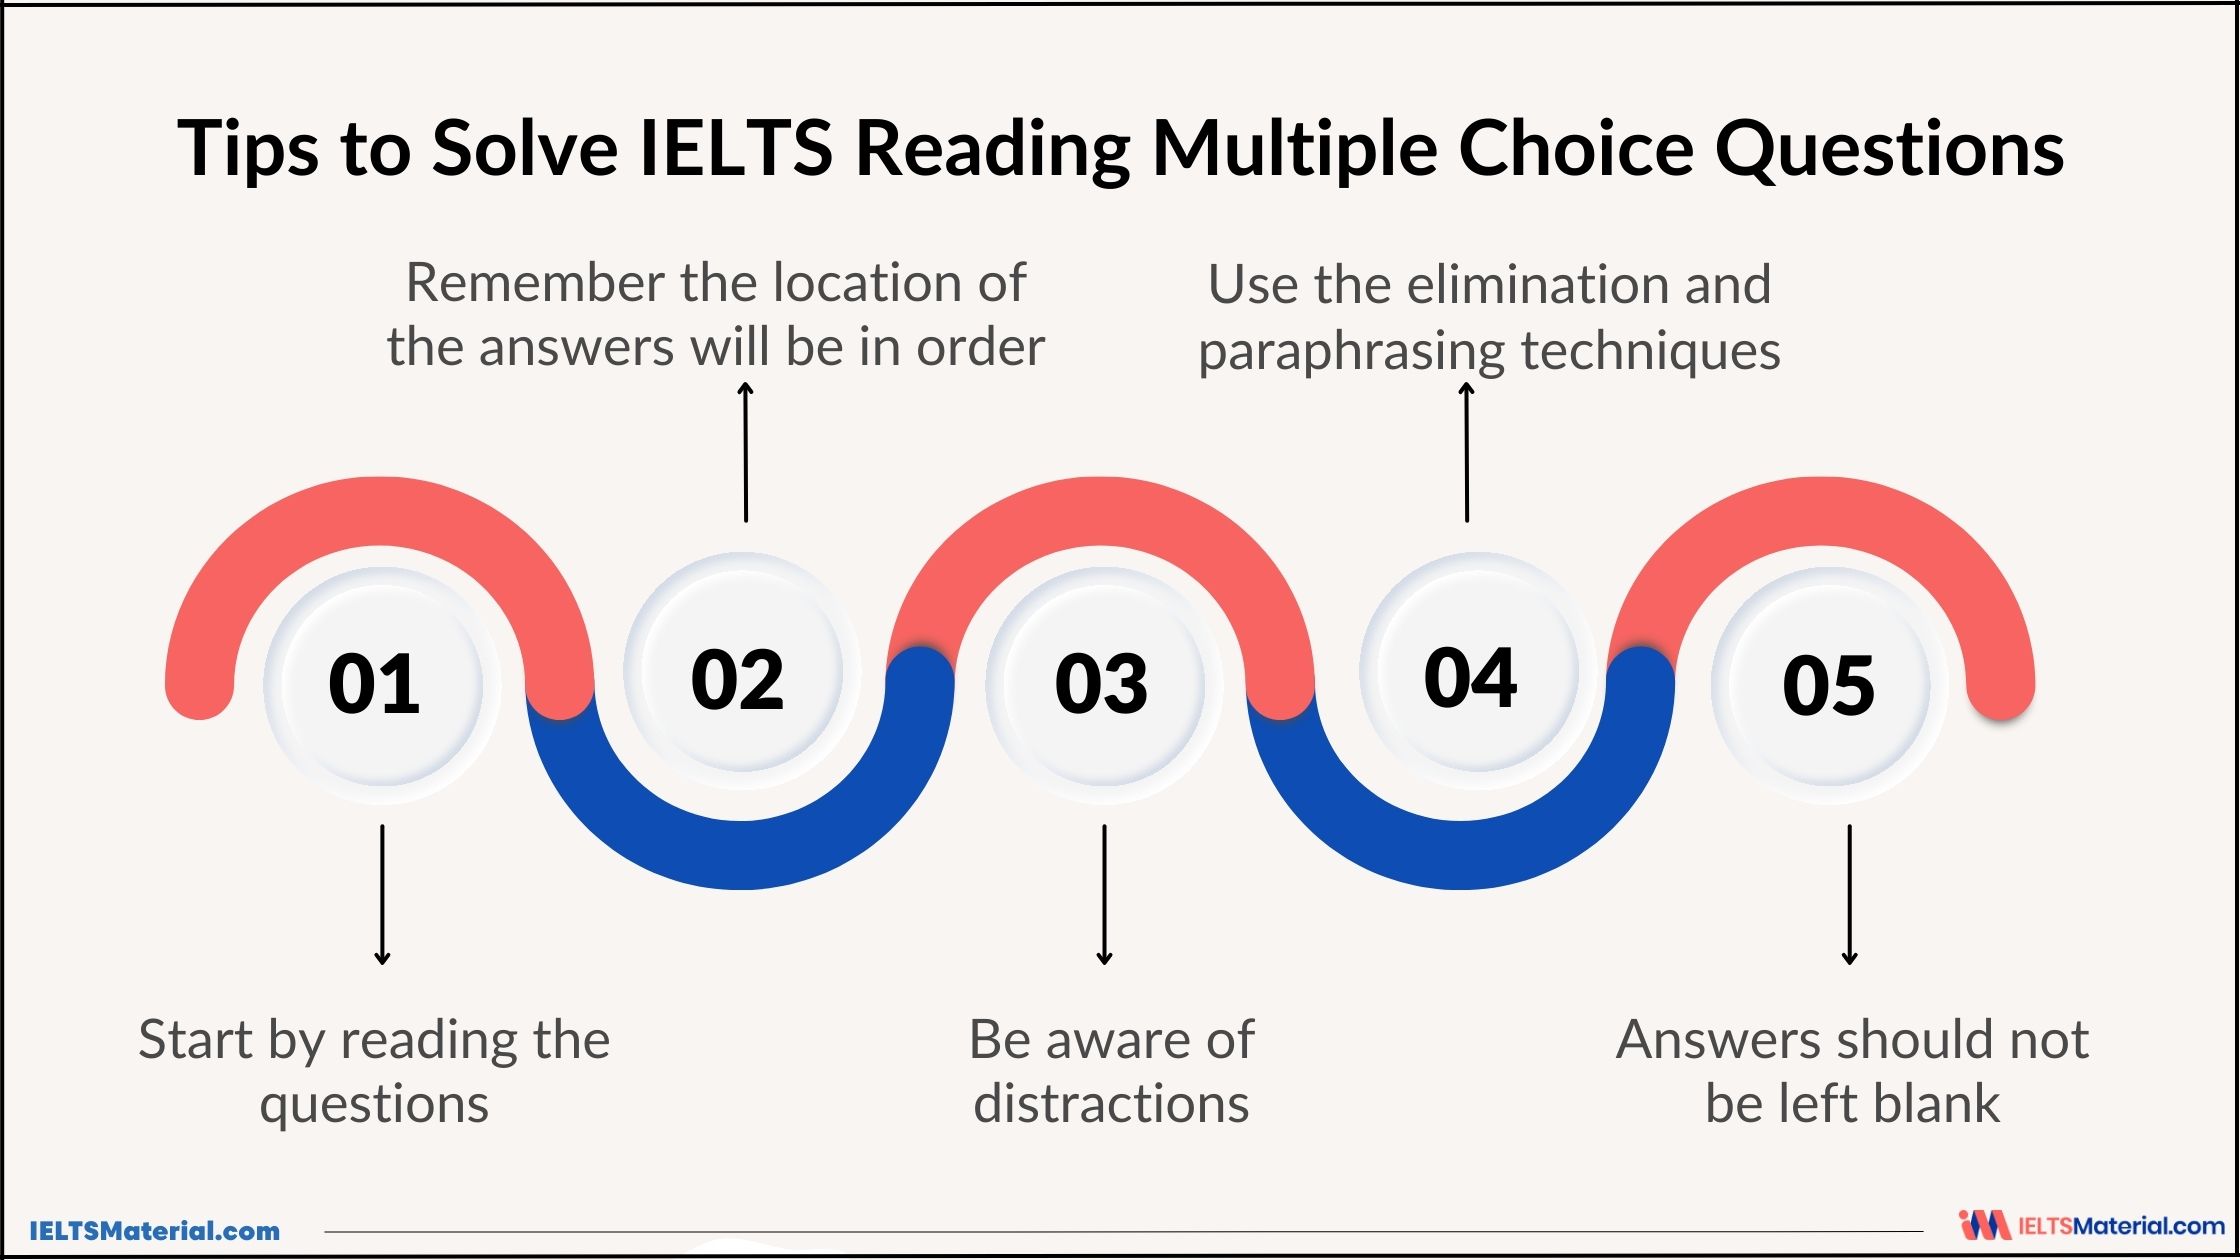 Tips to Solve IELTS Reading Multiple Choice Questions